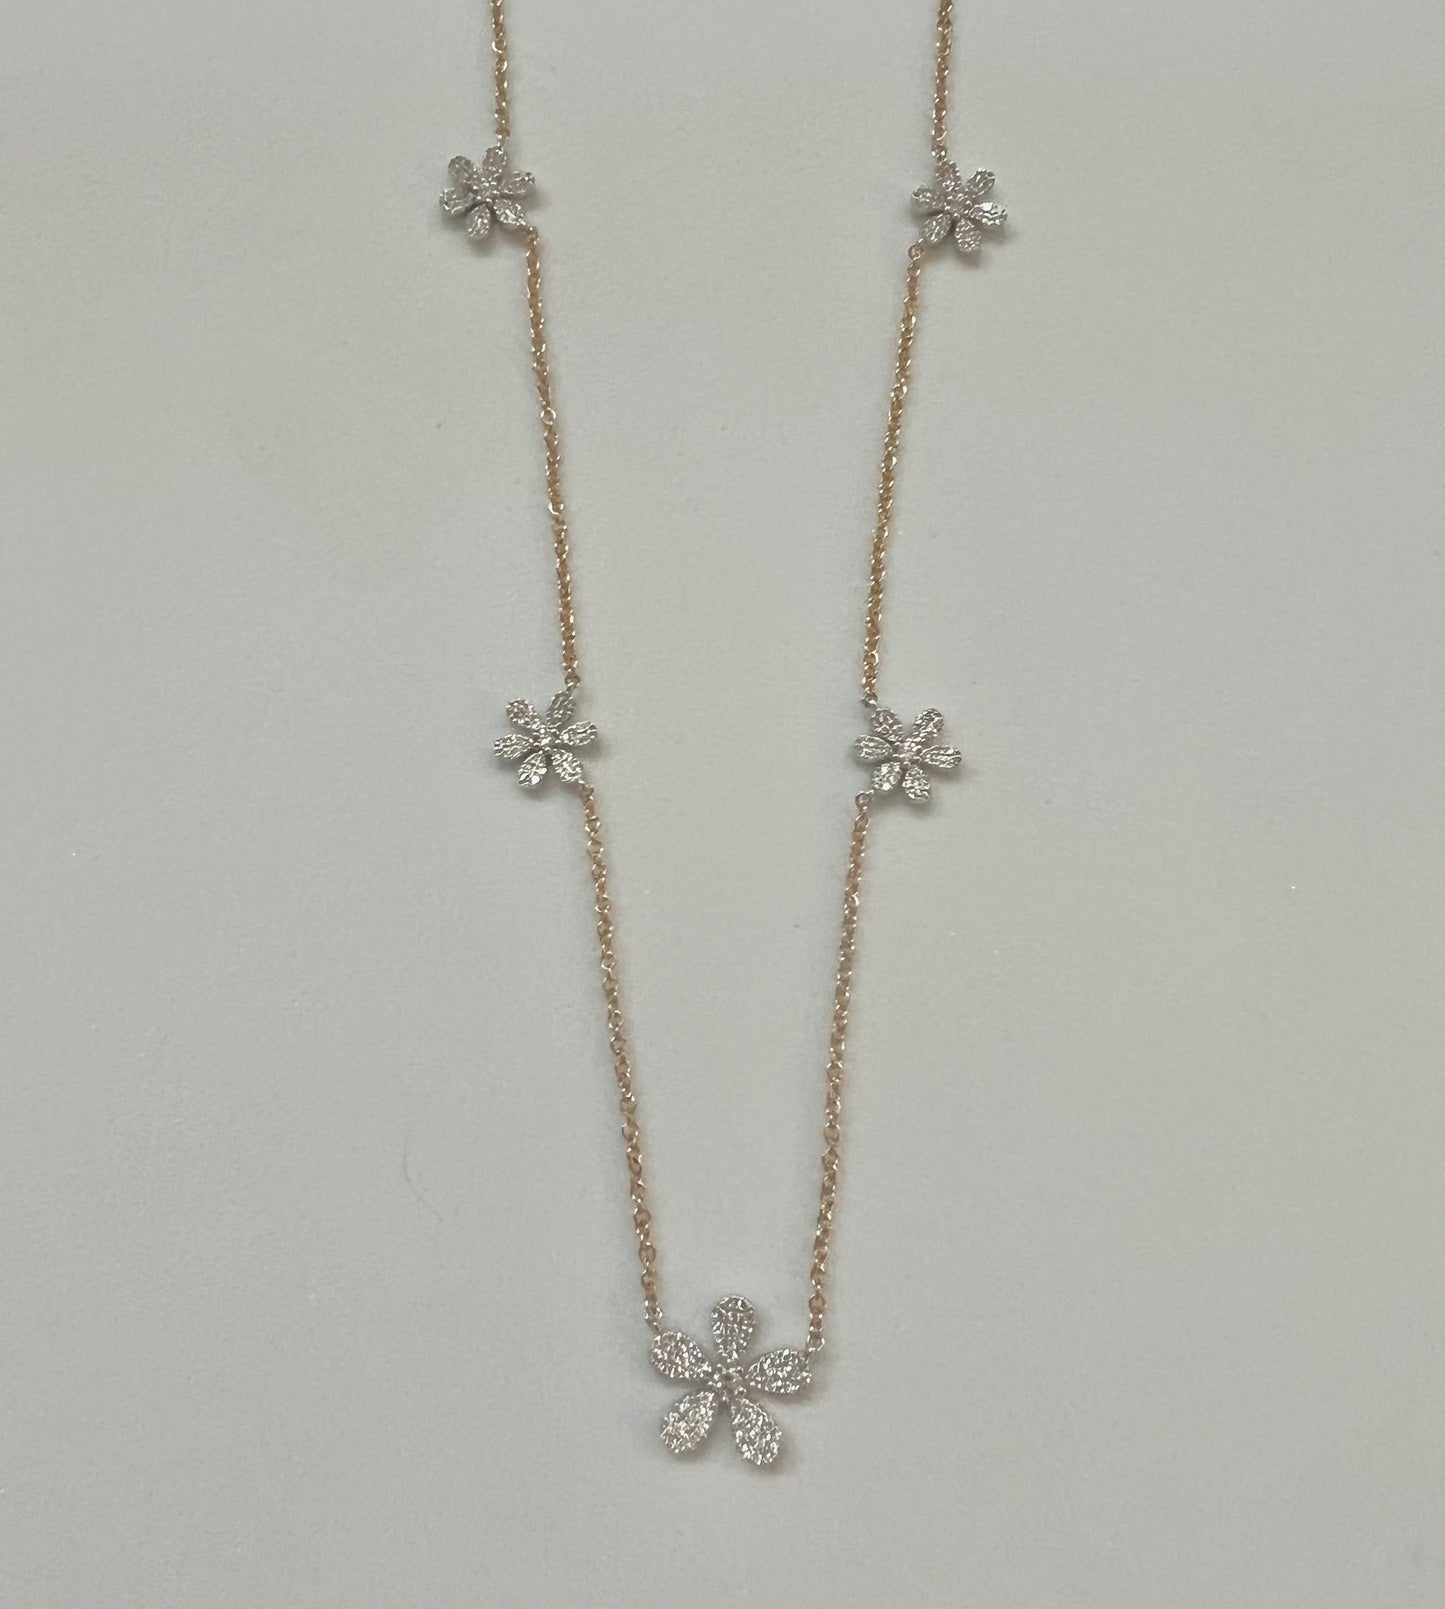 14K yellow gold and white gold flower necklace